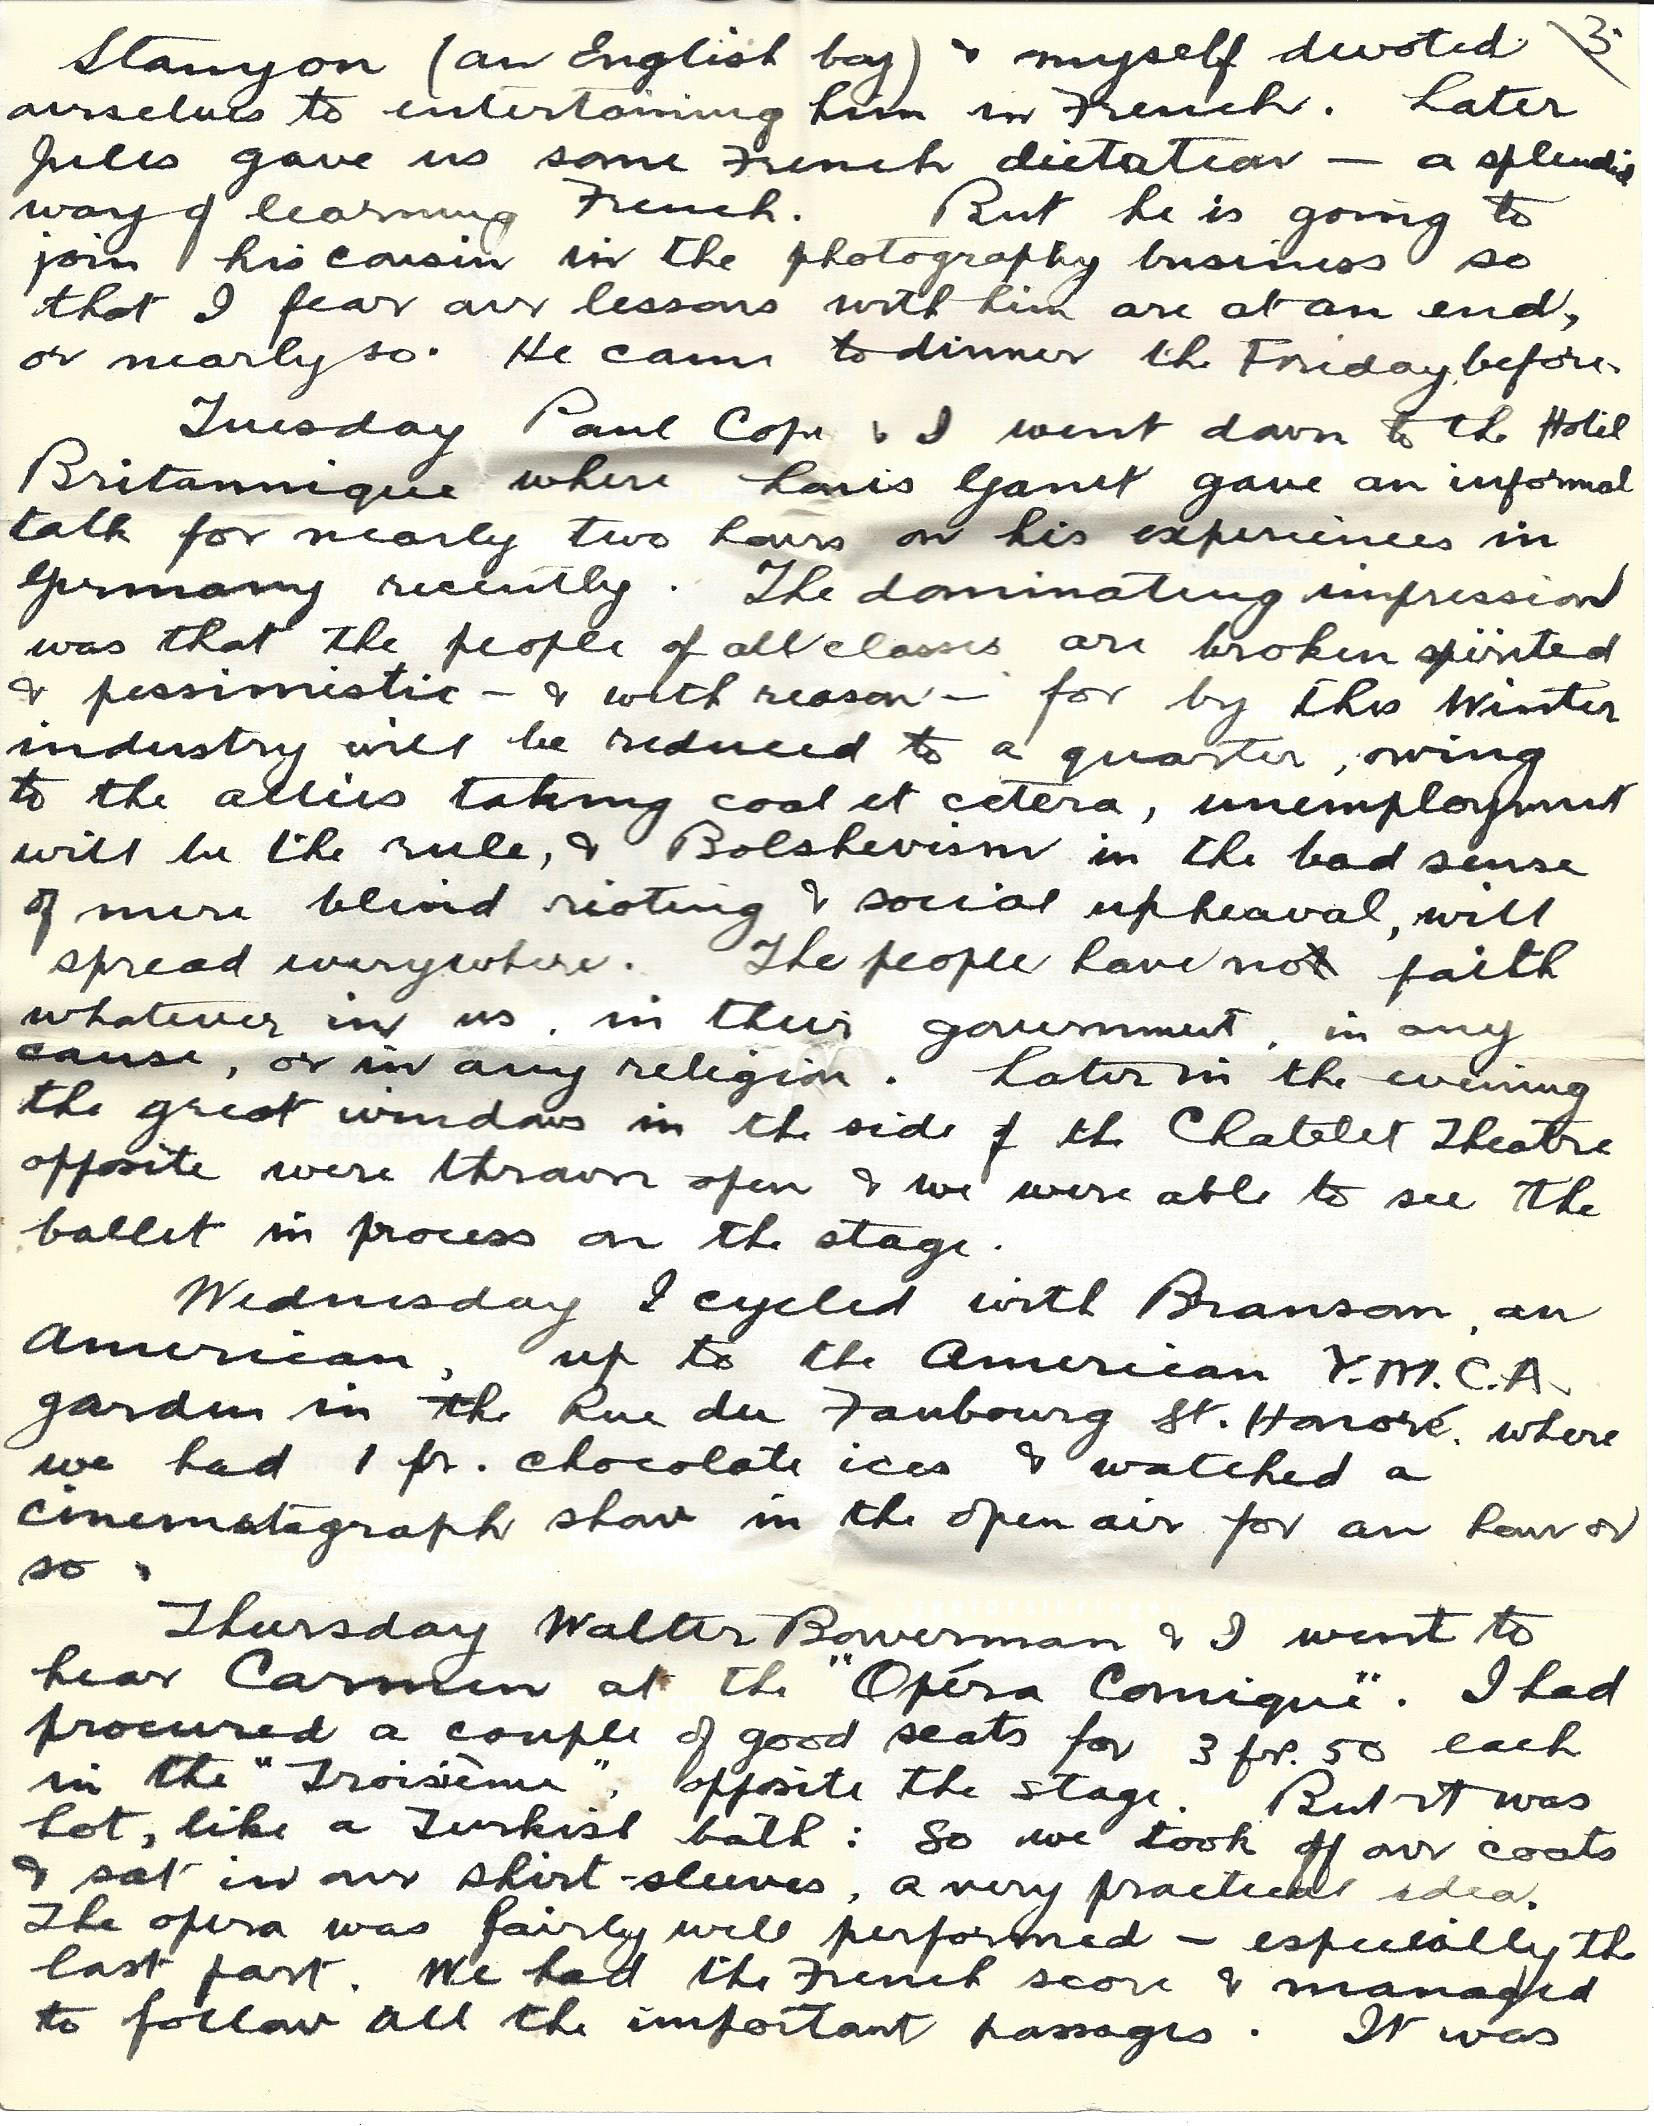 1919-08-16 p3 Donald Bearman letter to his father